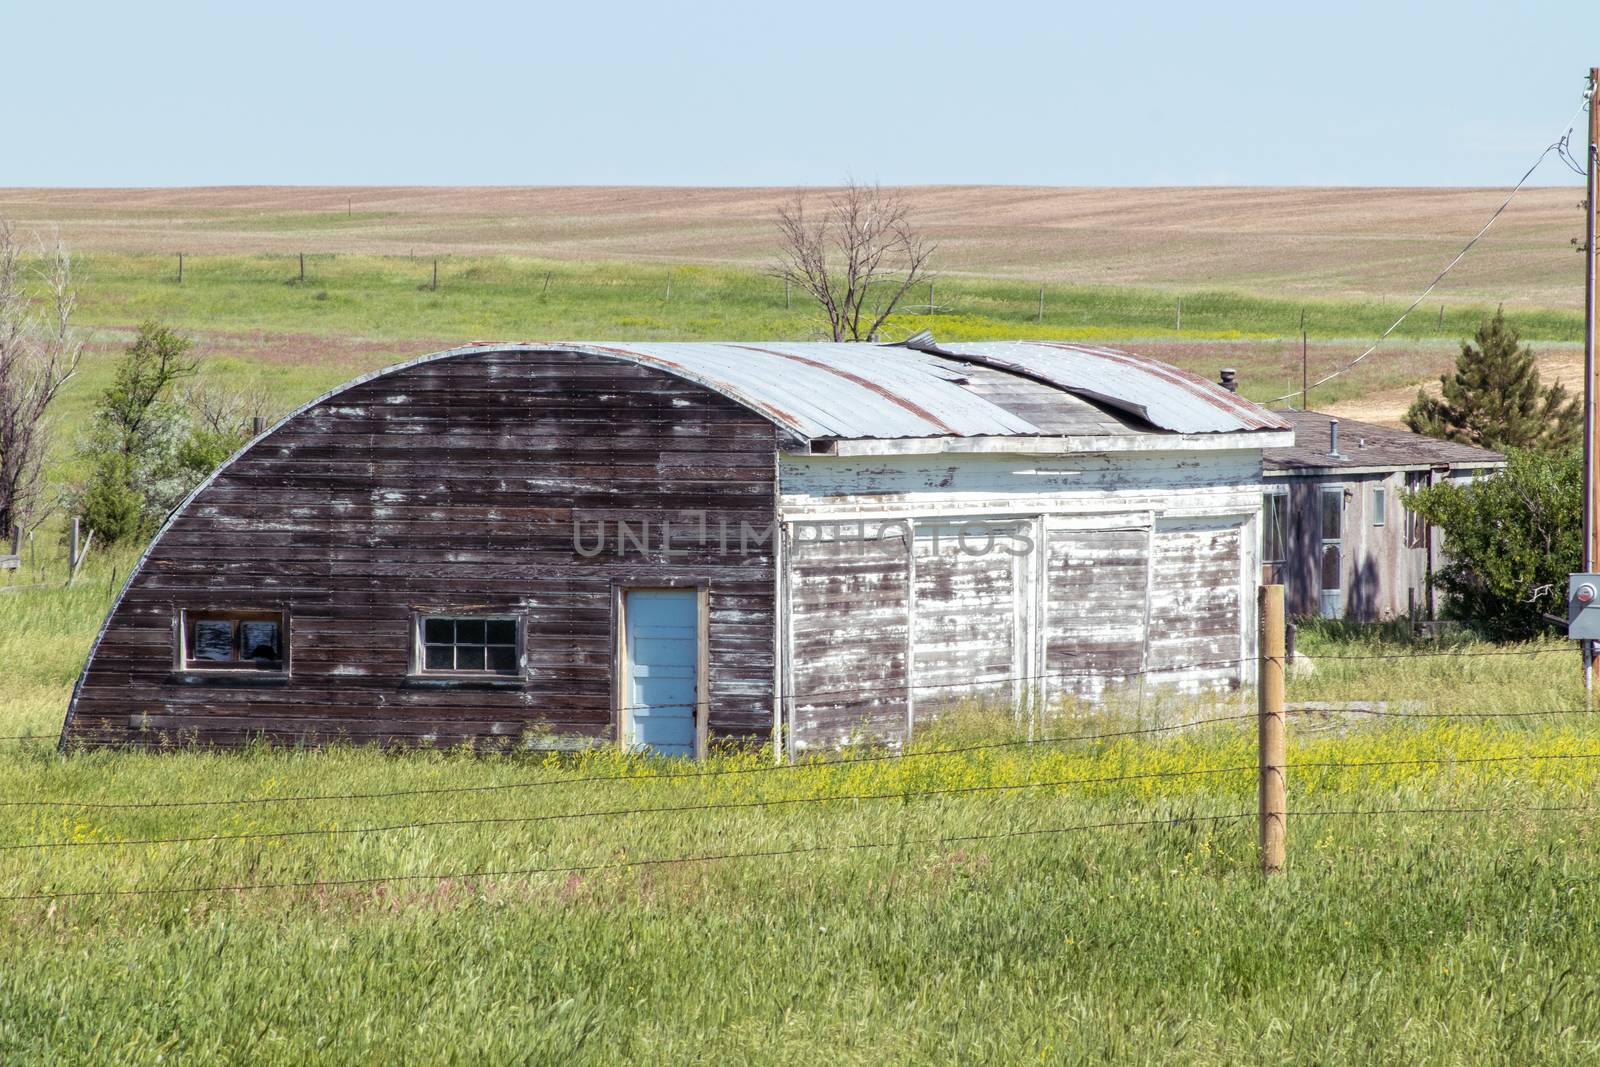 An old barn in a grassy field. High quality photo